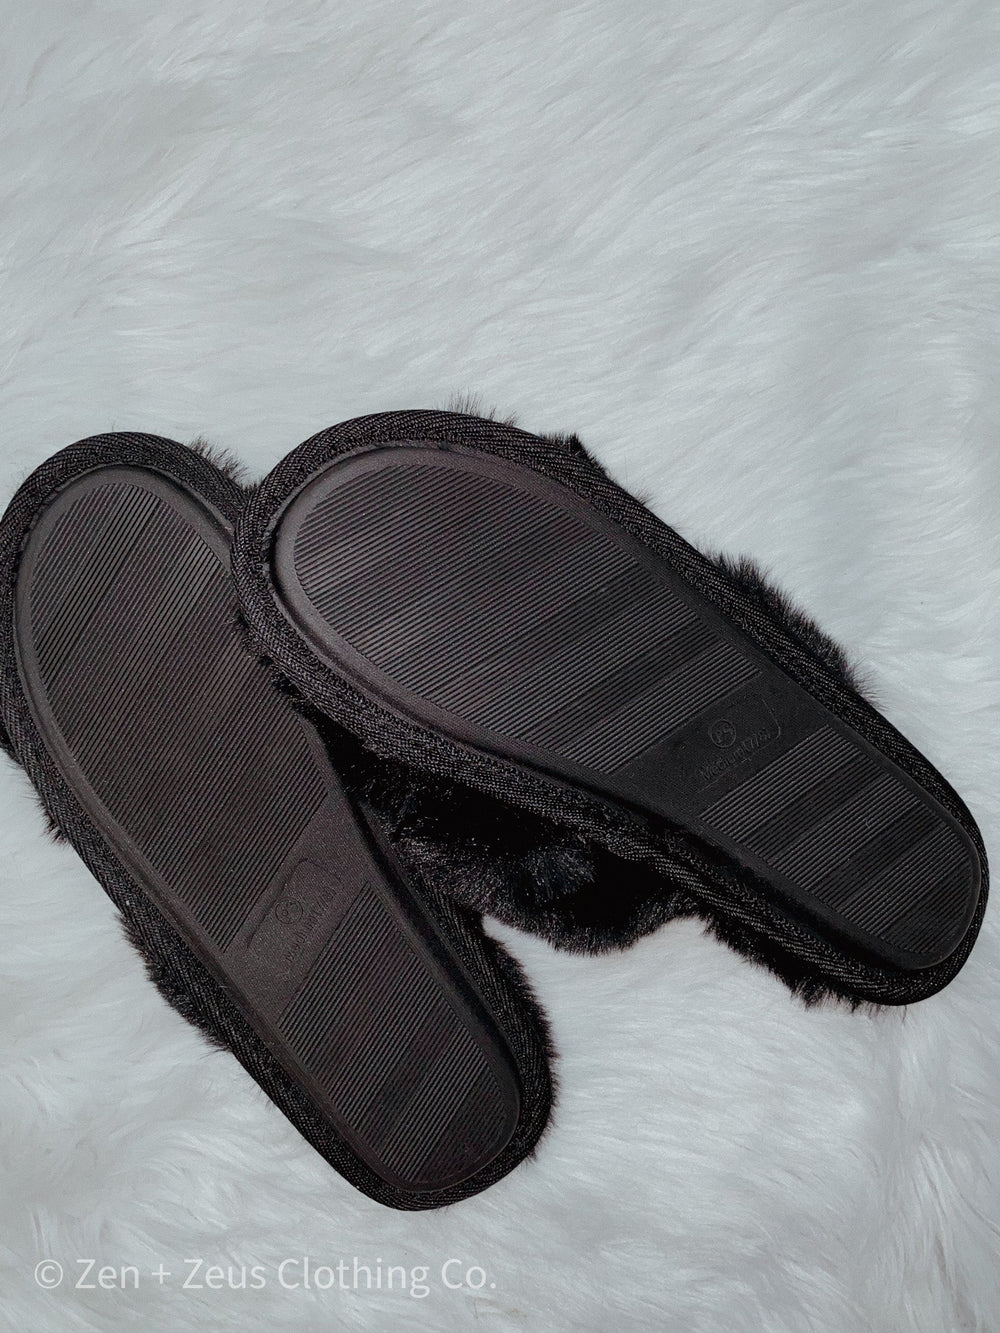 Fuzzy Cross Band Slide Slippers - Shoes